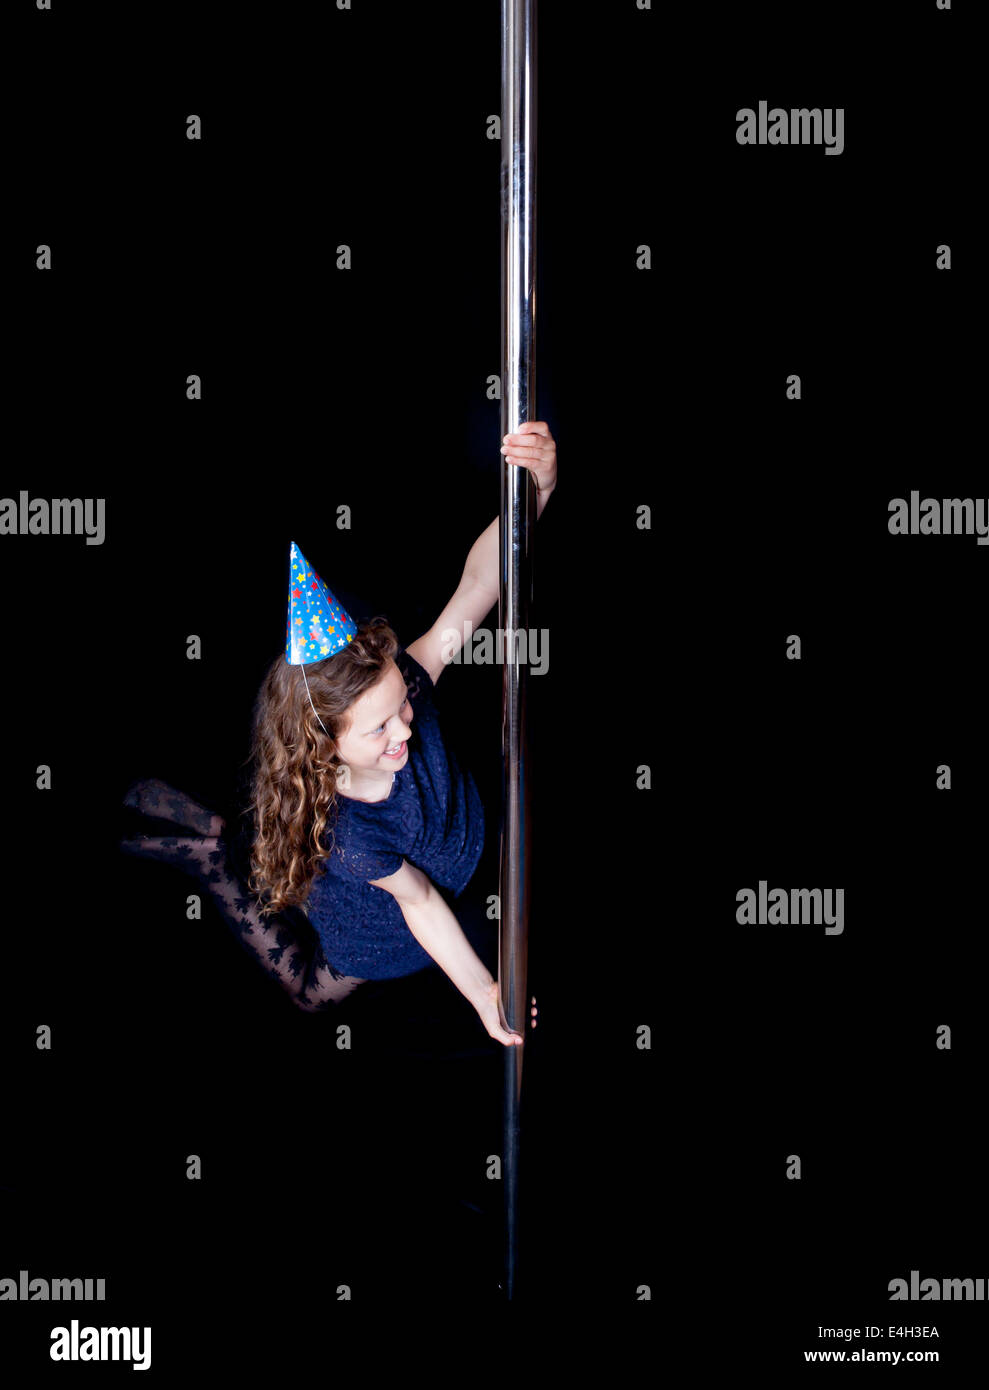 A young girl celebrating her birthday playing on the pole at a pole fitness class. Stock Photo